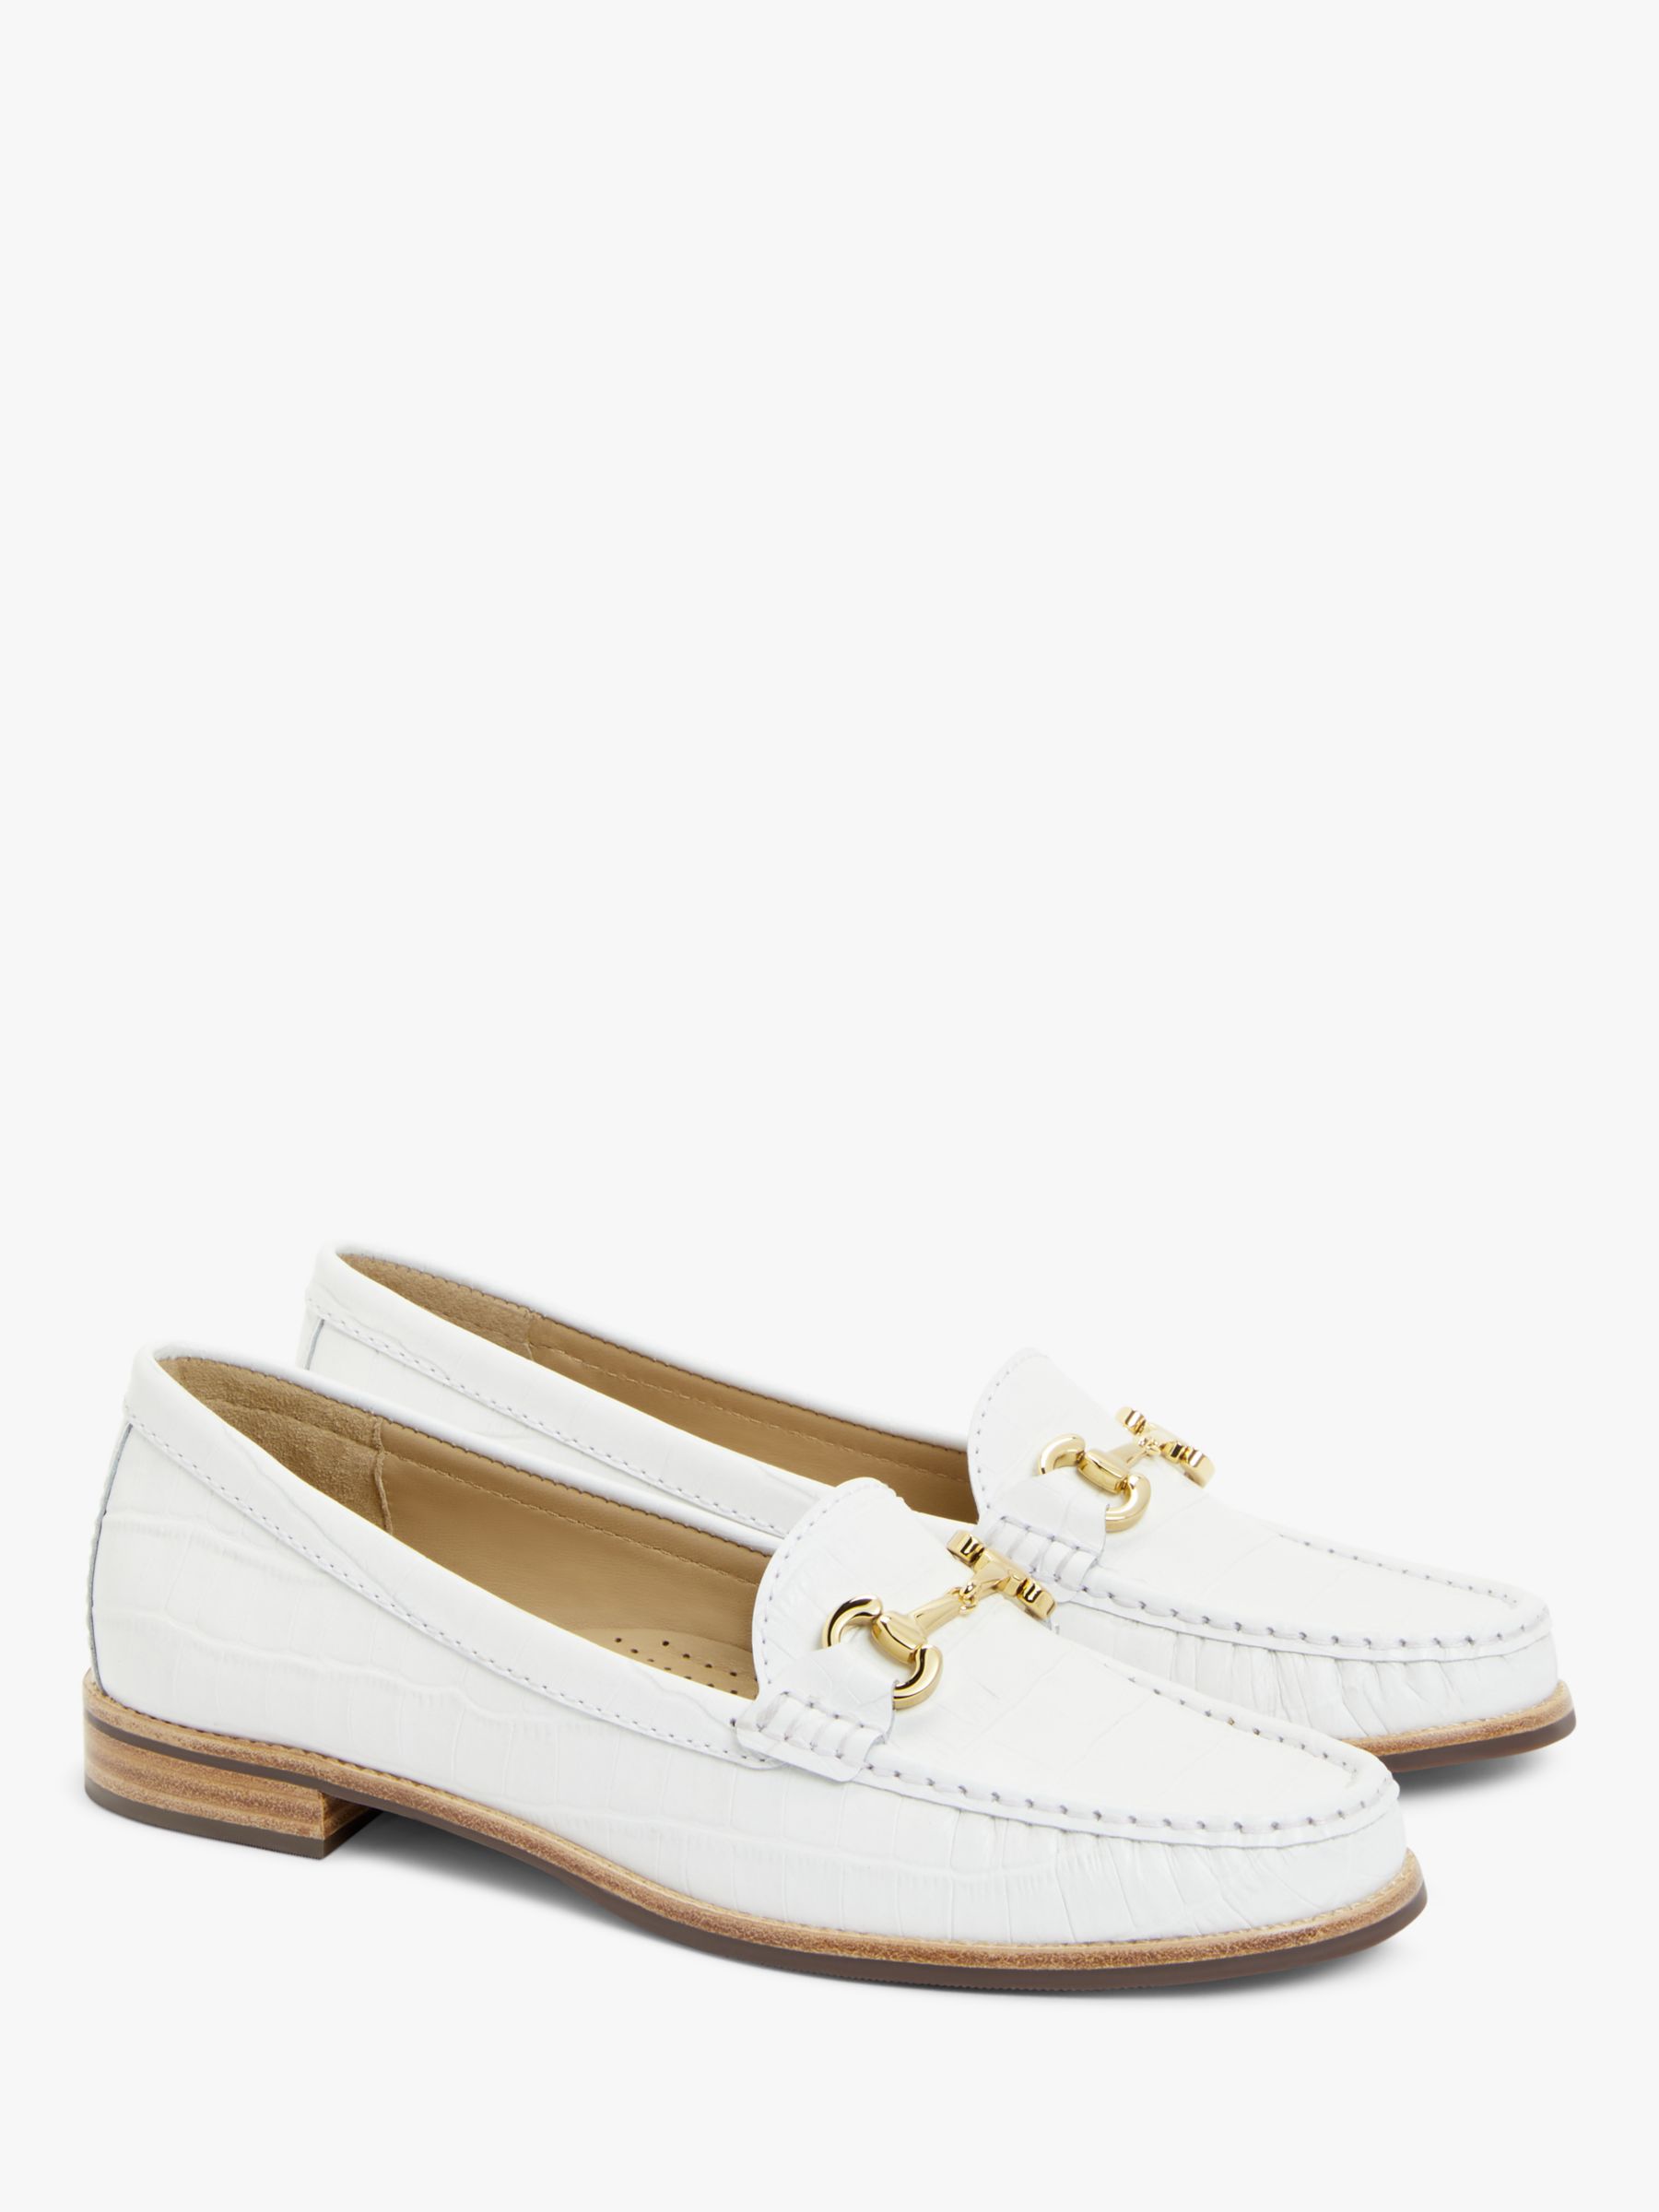 Buy John Lewis August Leather Moccasins Online at johnlewis.com